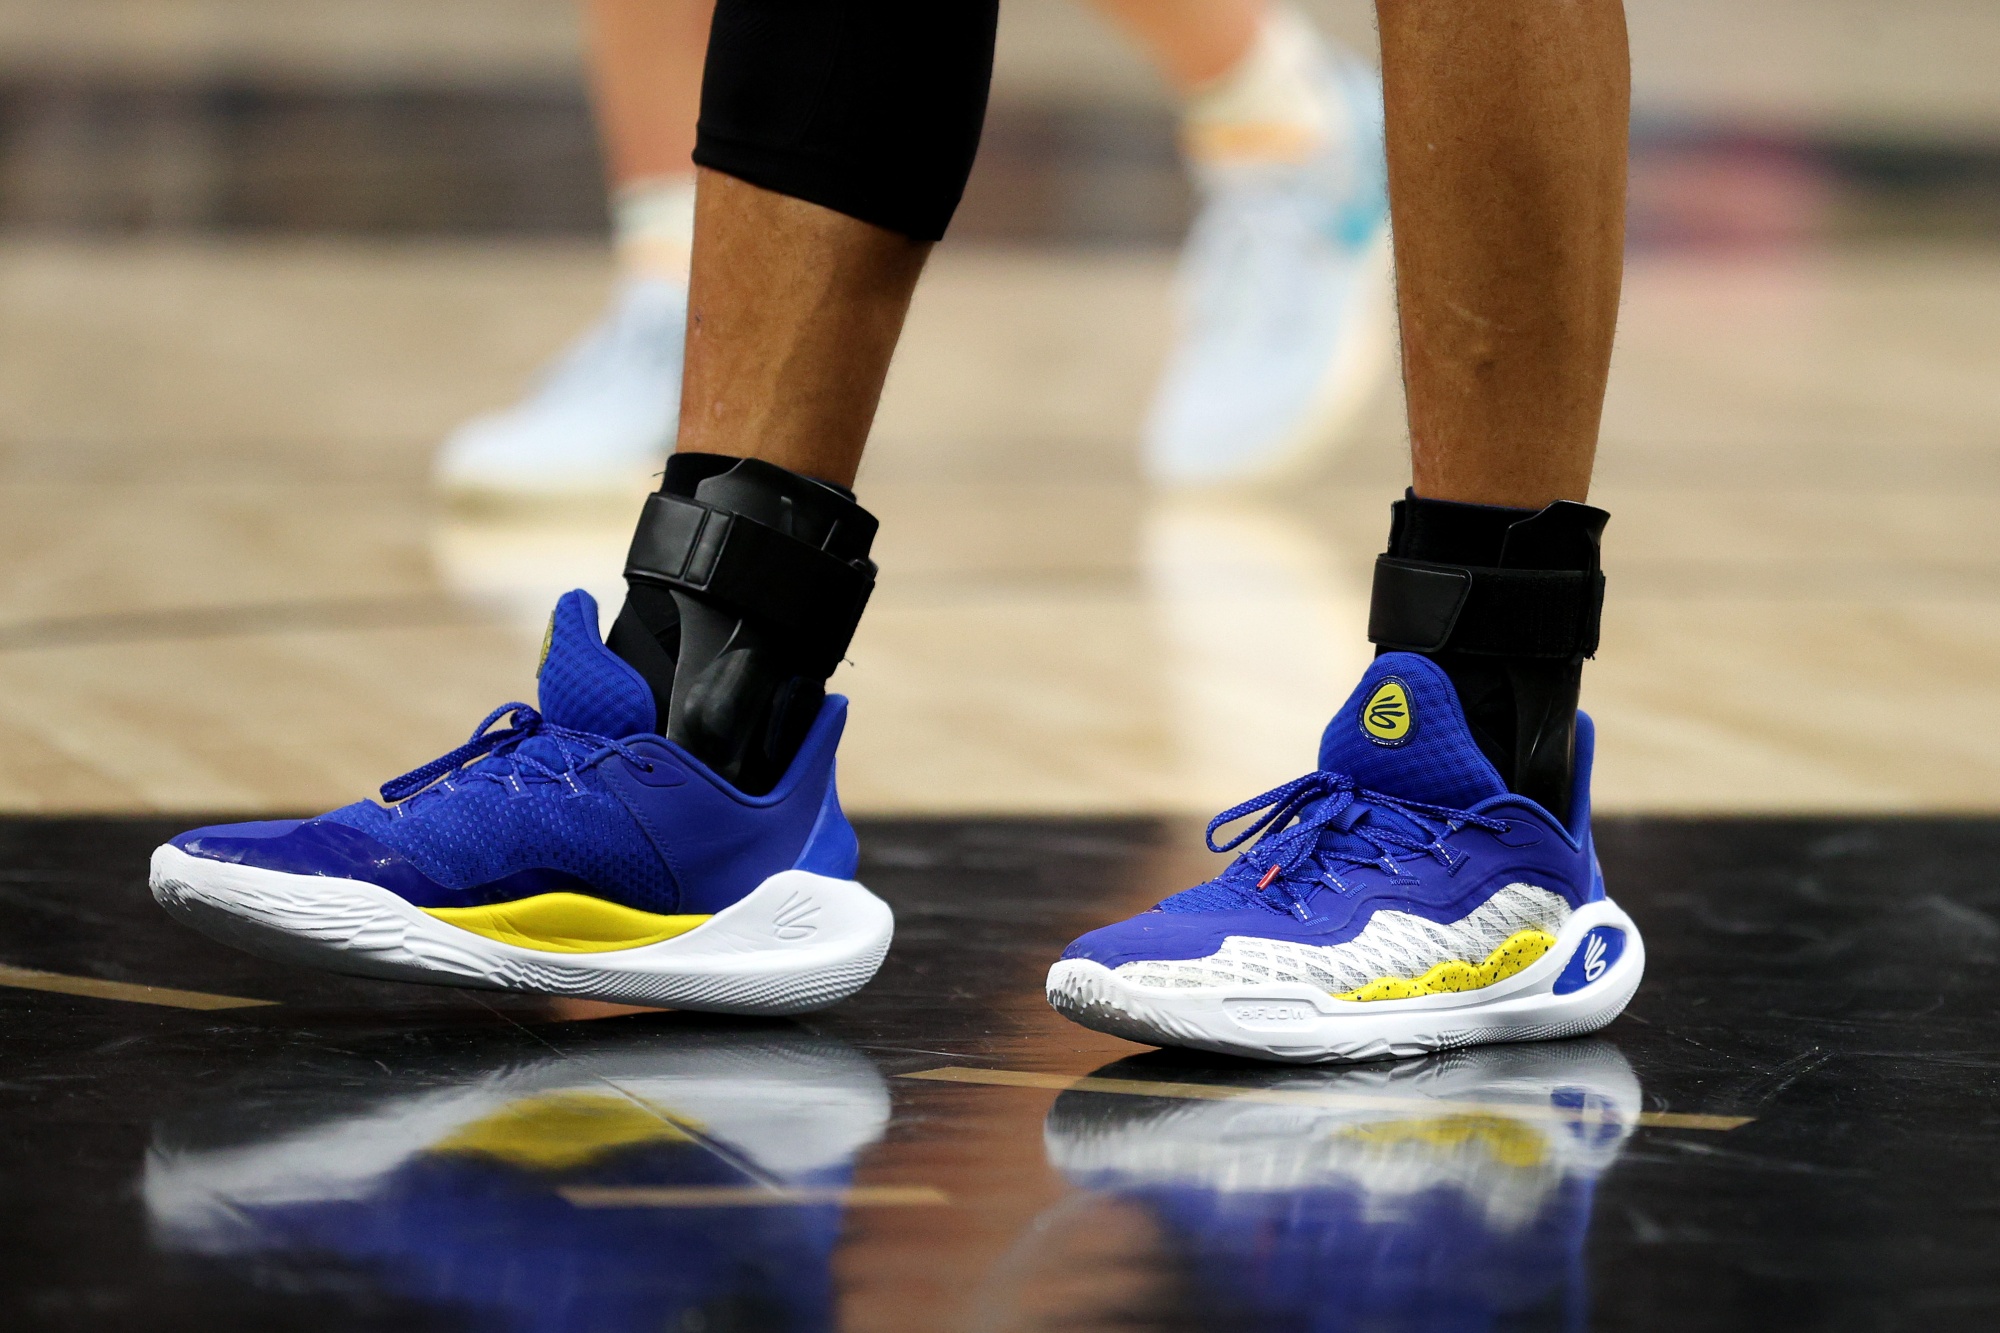 Ranking Top 5 Steph Curry's shoes under his deal with Under Armour